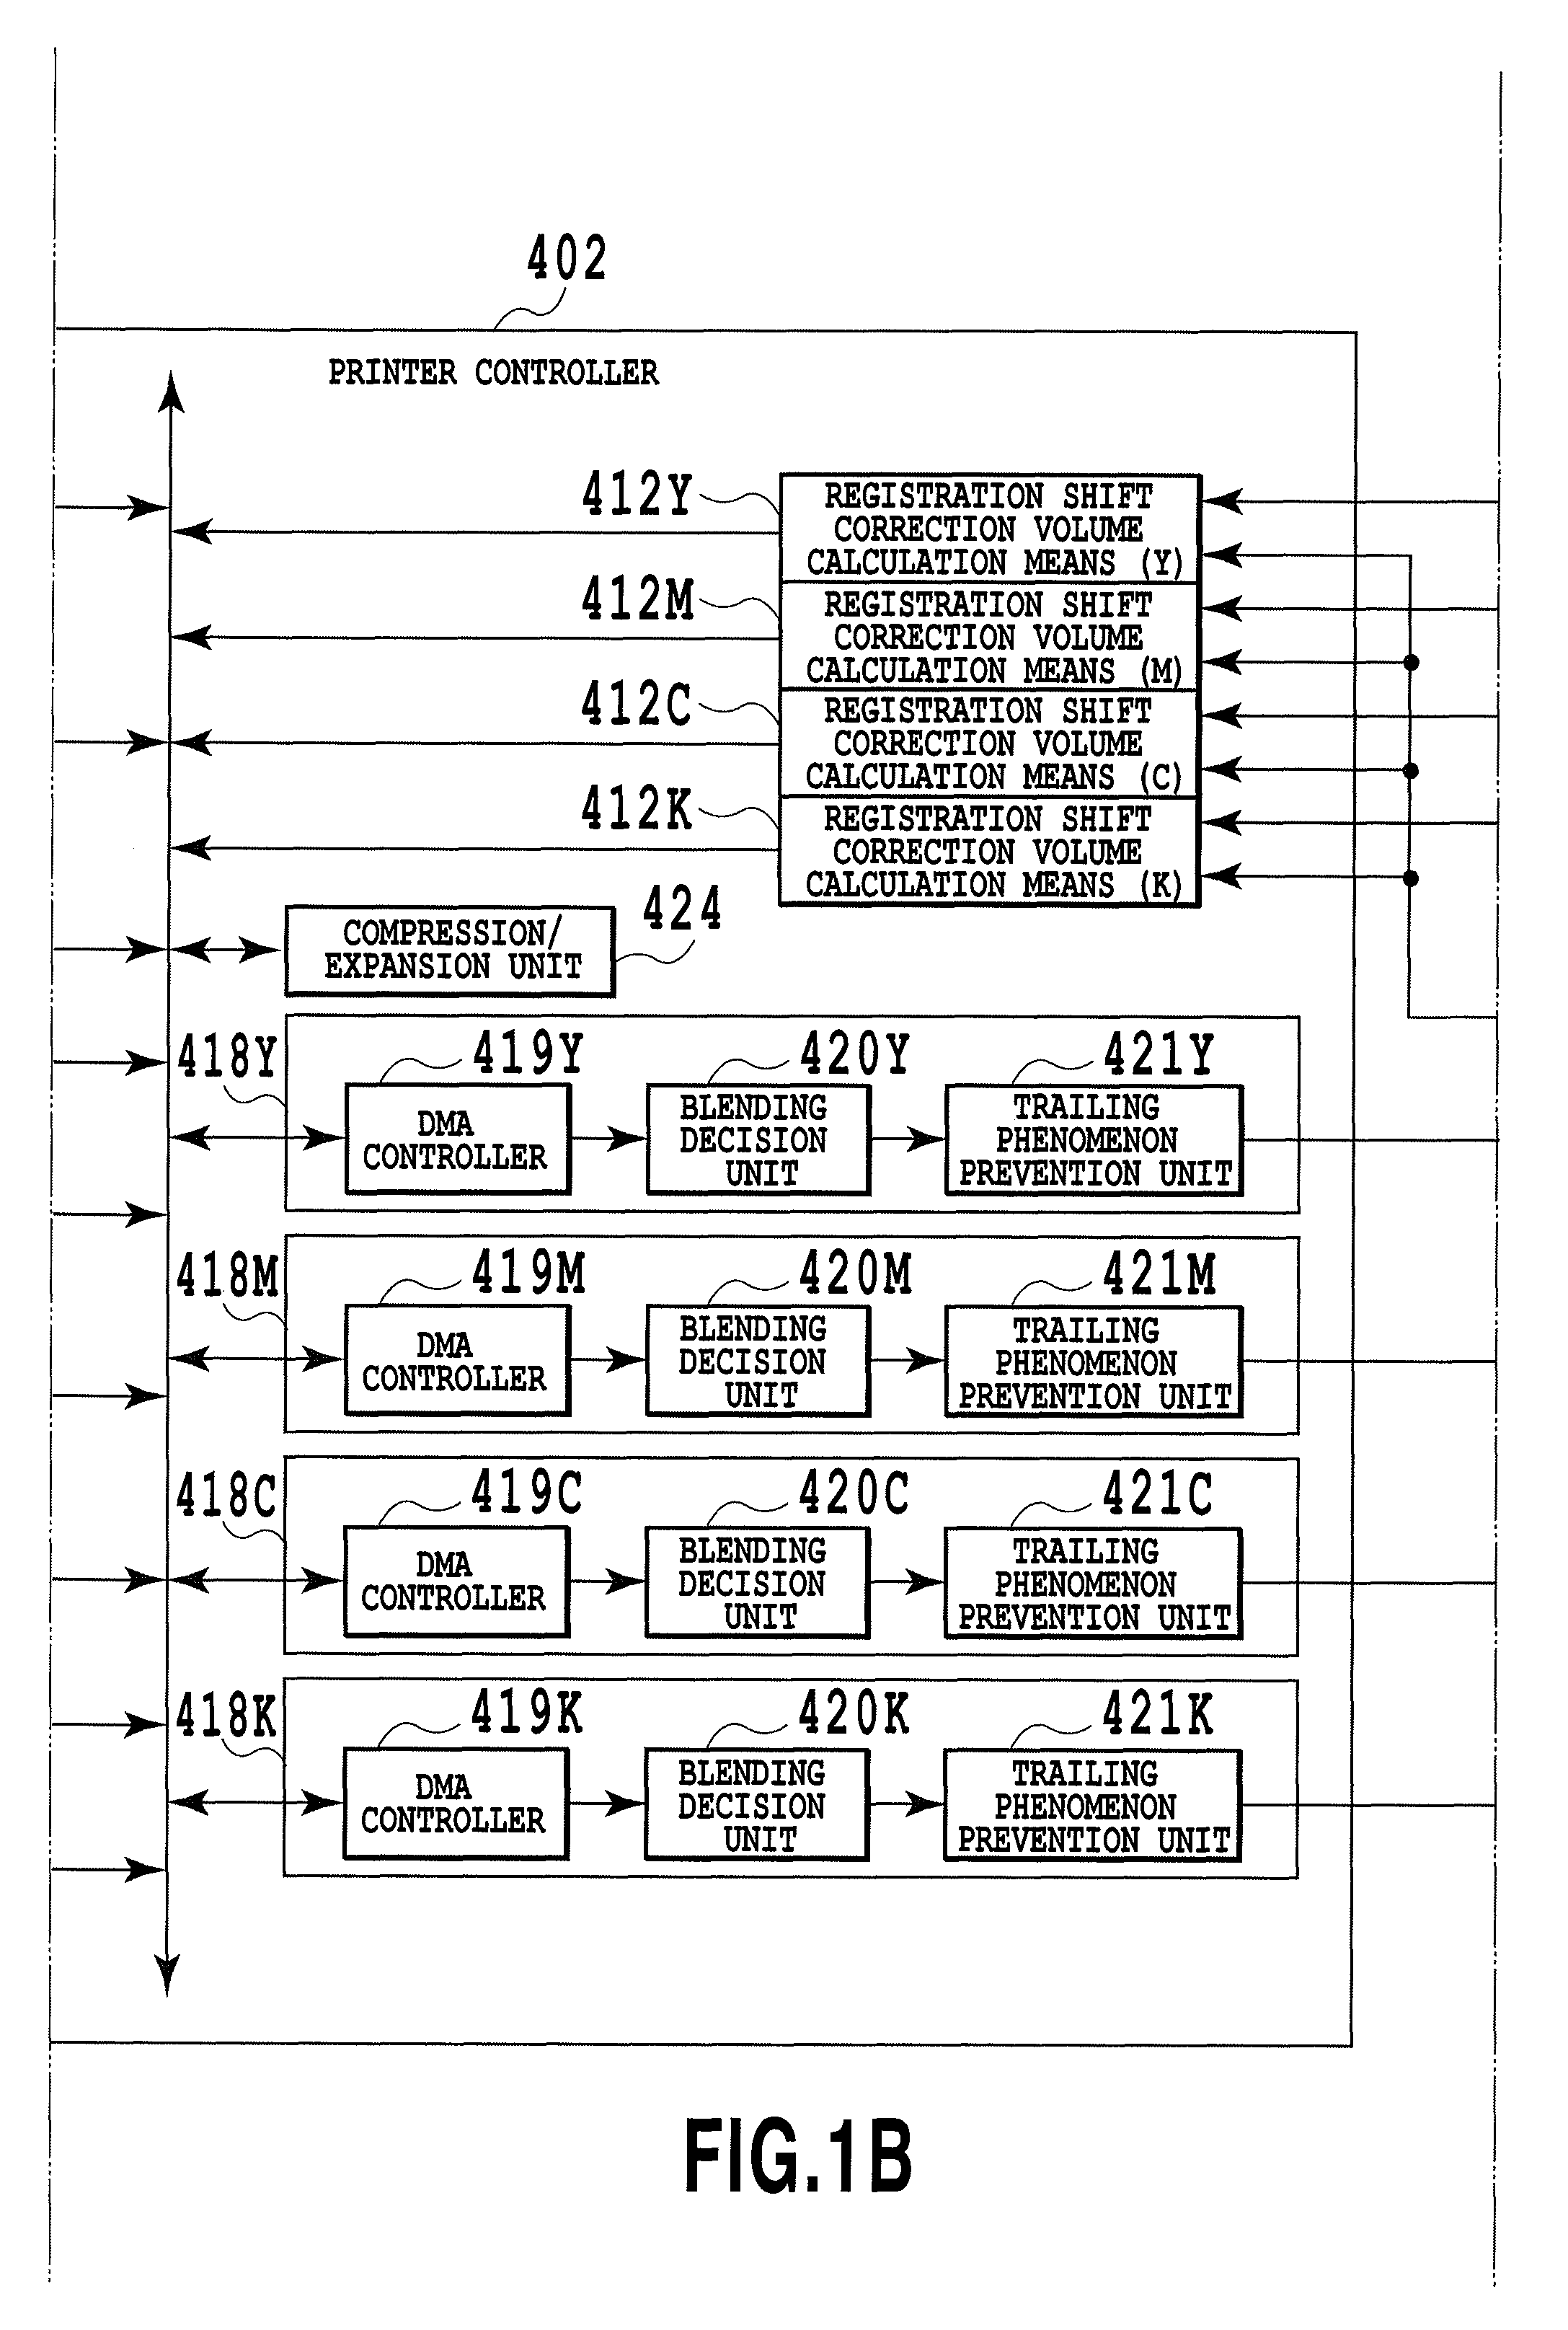 Apparatus and method for correcting registration errors and trailing phenomenon in a printed image